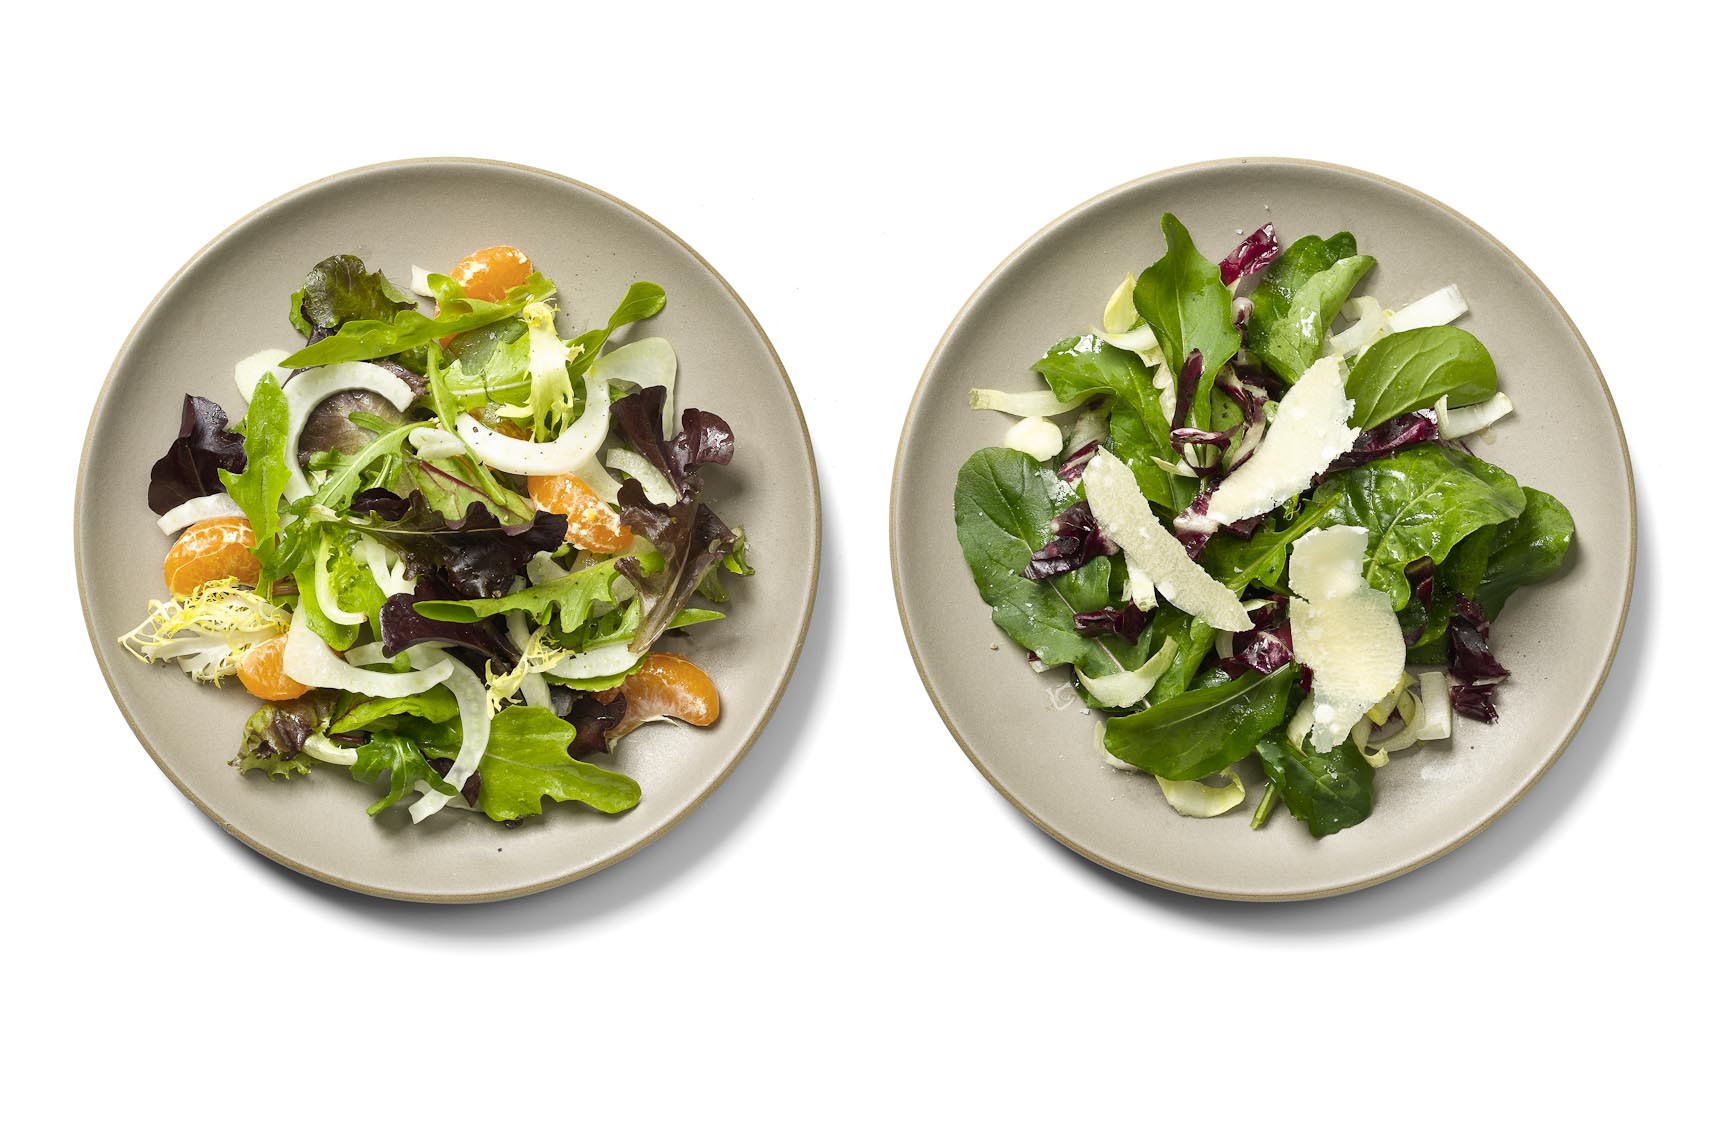 Food Still Life | Mixed Greens on Serving Plate